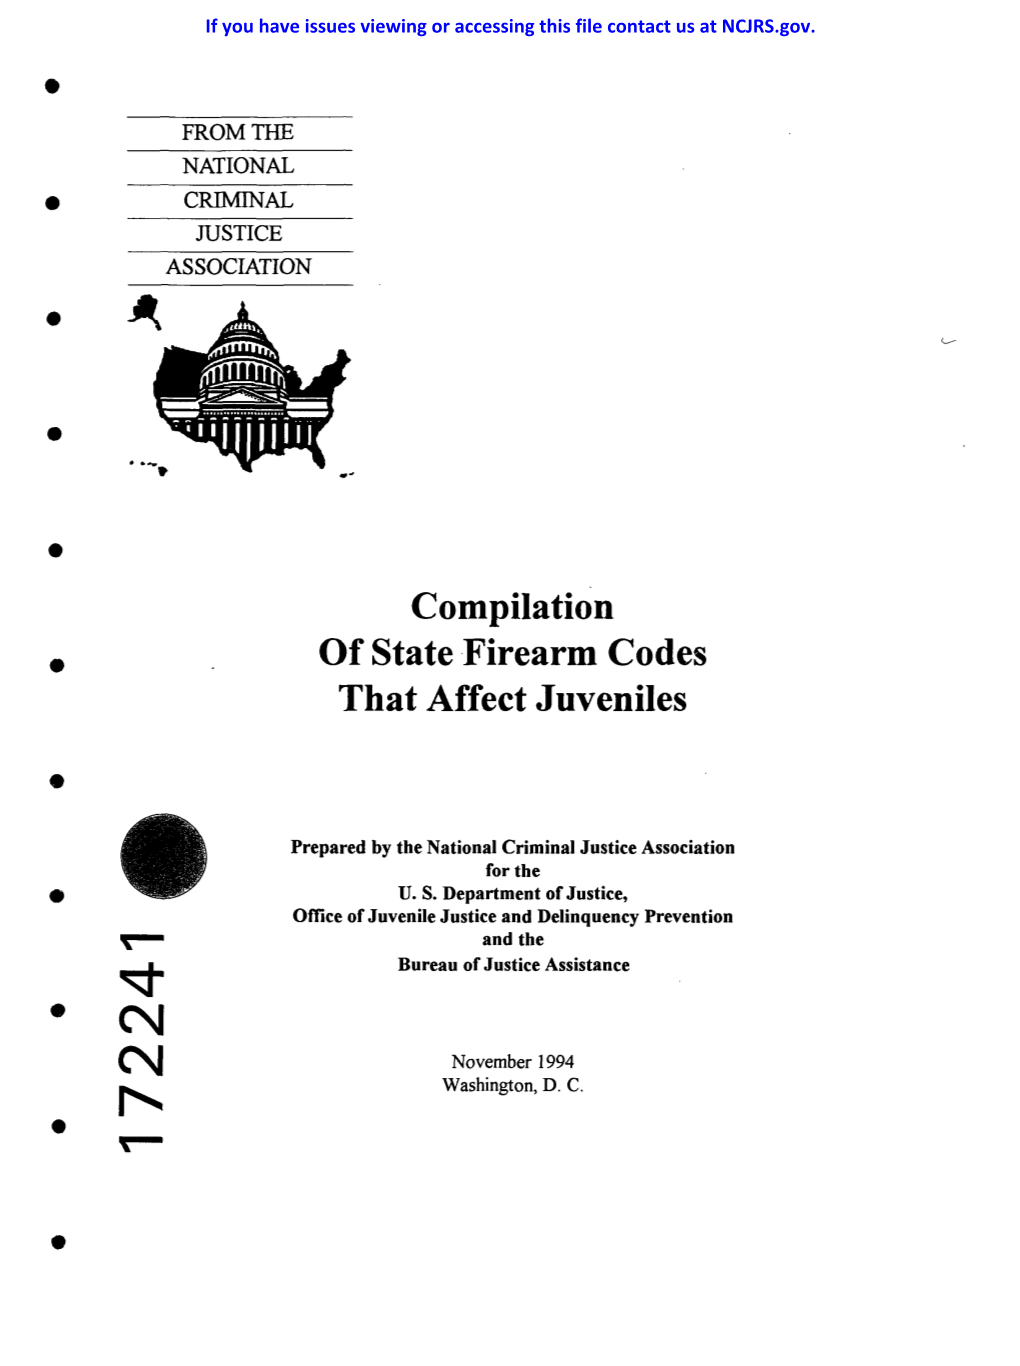 Compilation of State-Firearm Codes That Affect Juveniles